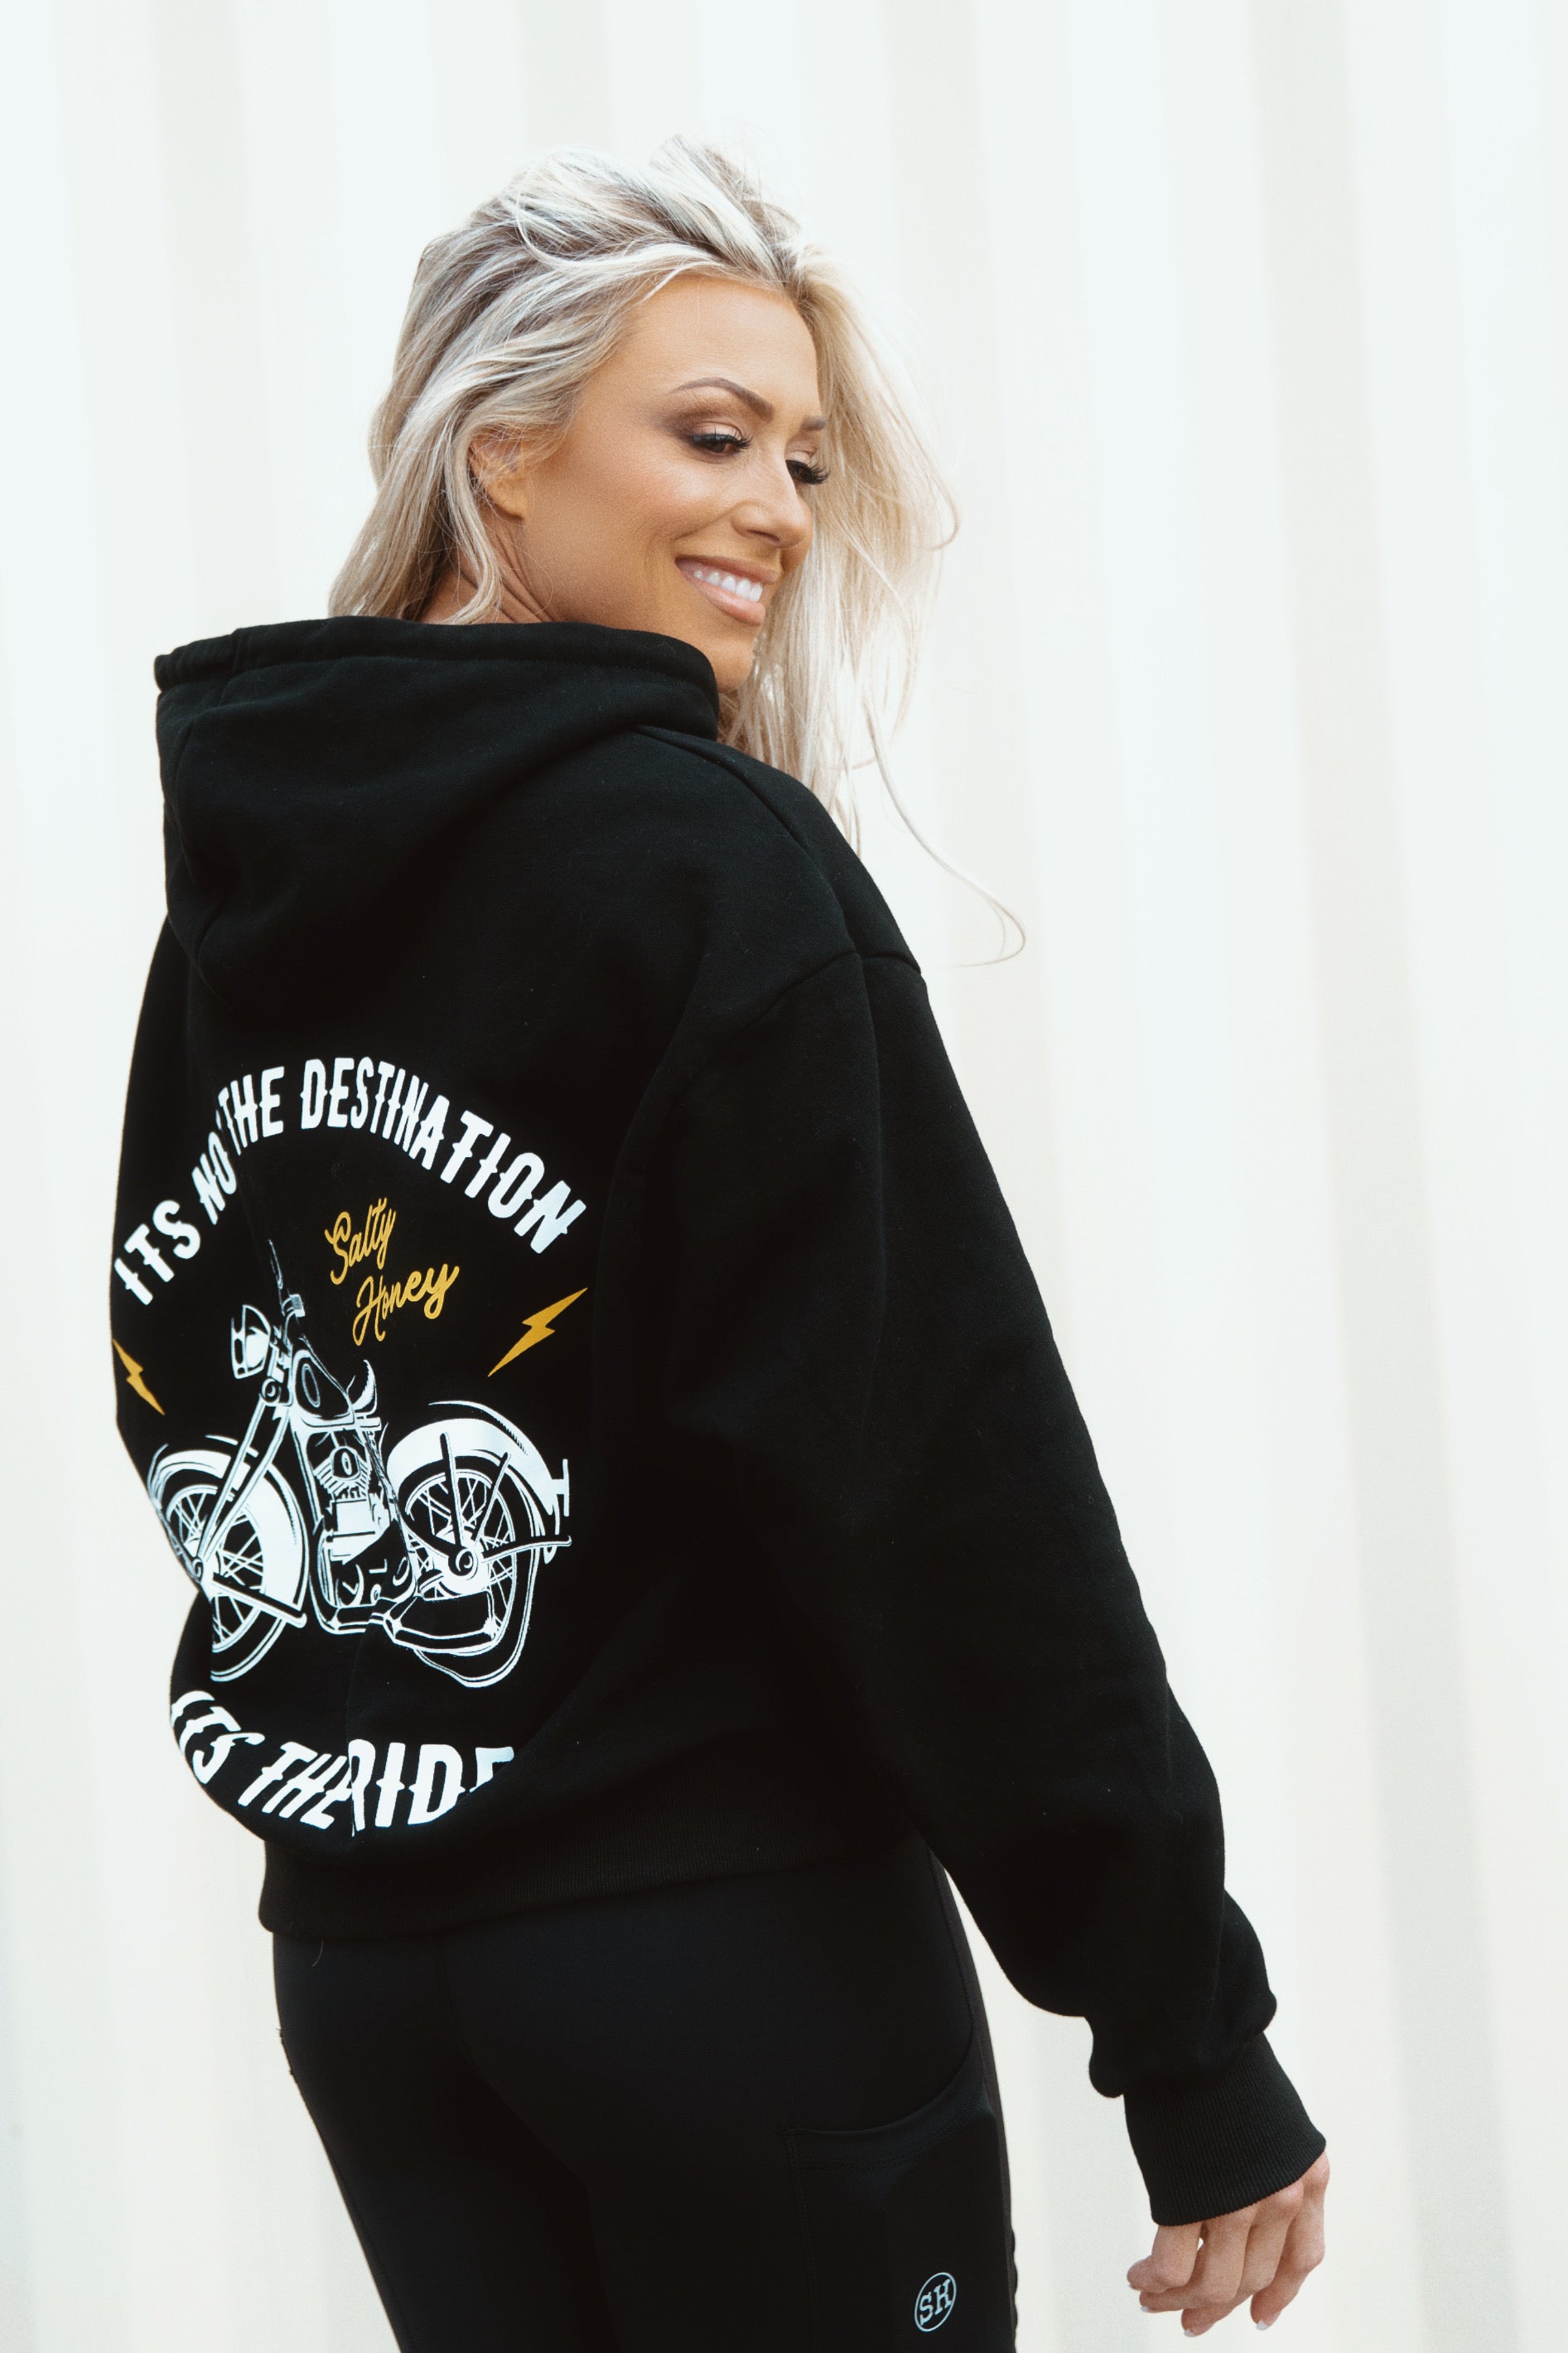 ACCLAIM HOODIE: IT'S NOT THE DESTINATION, IT'S THE RIDE